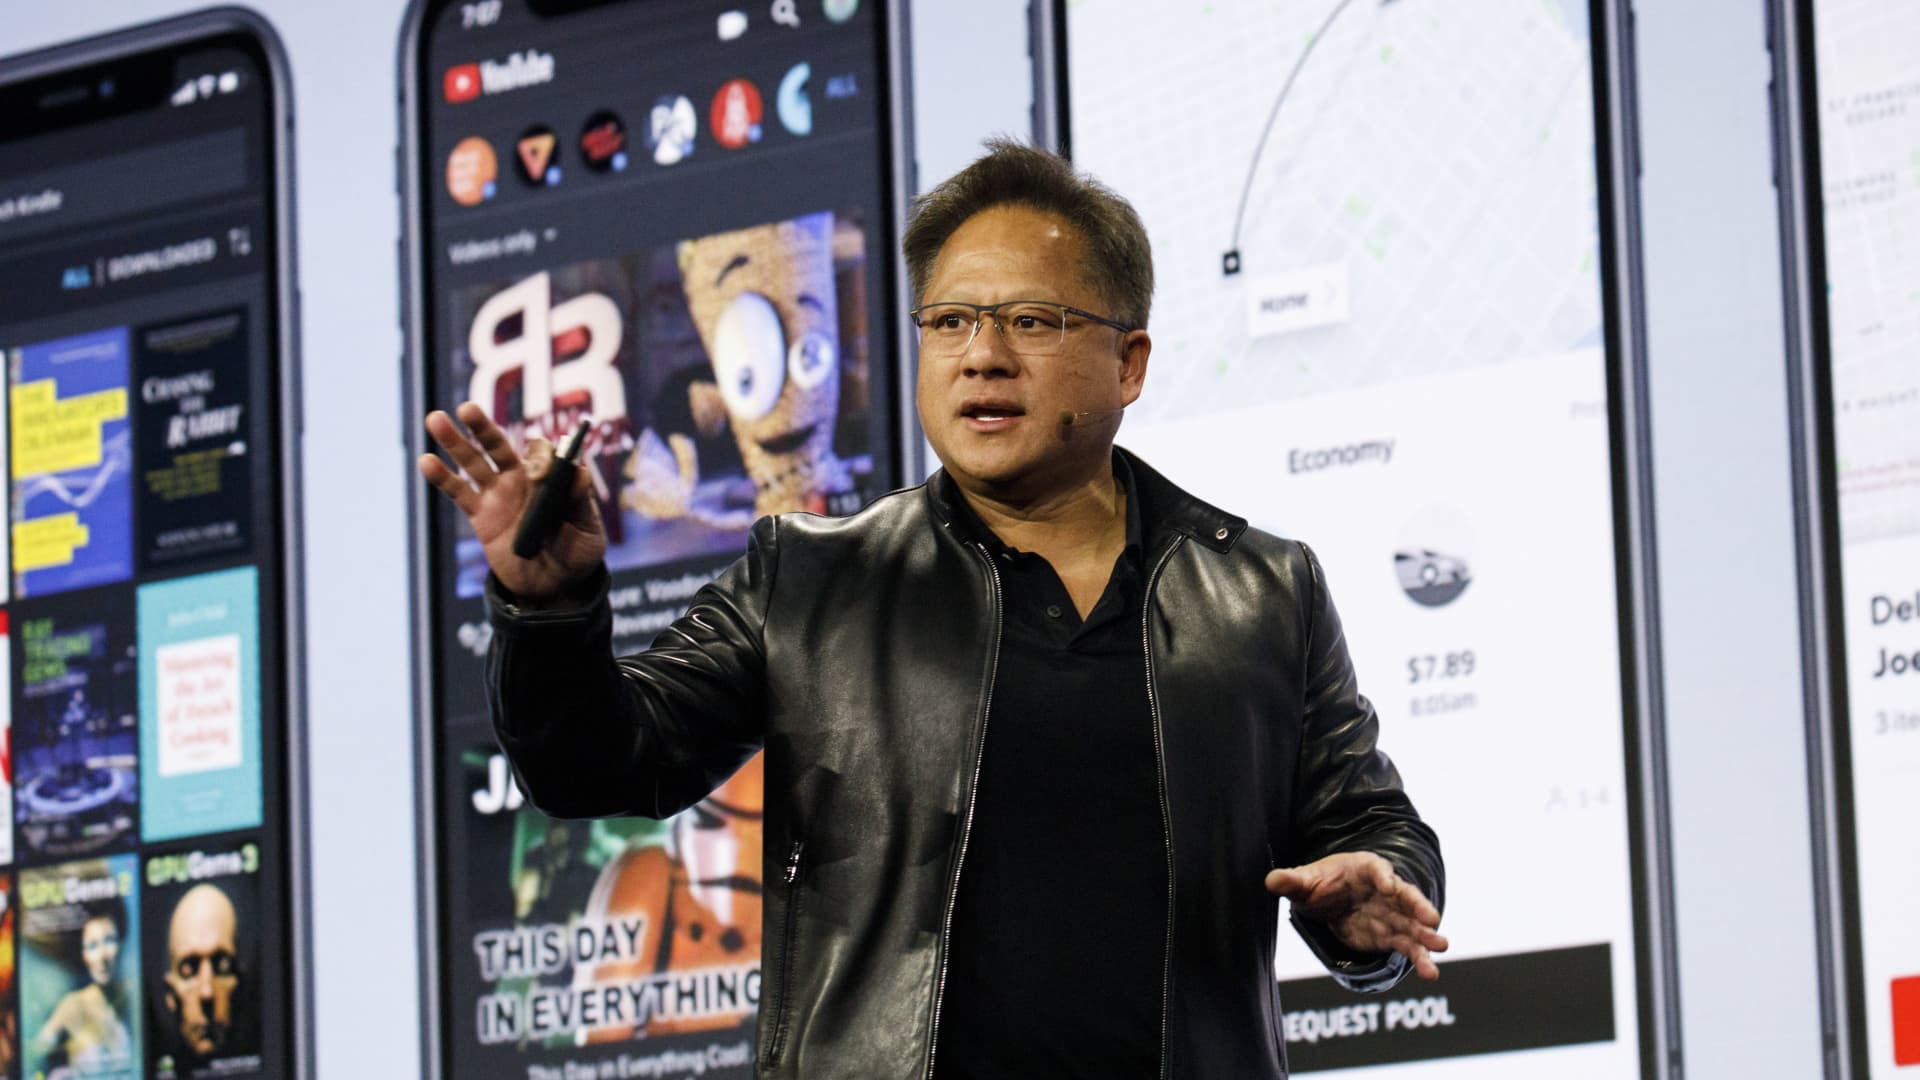 Nvidia reports slowing growth after earlier warning, says gaming market conditions are ‘challenging’